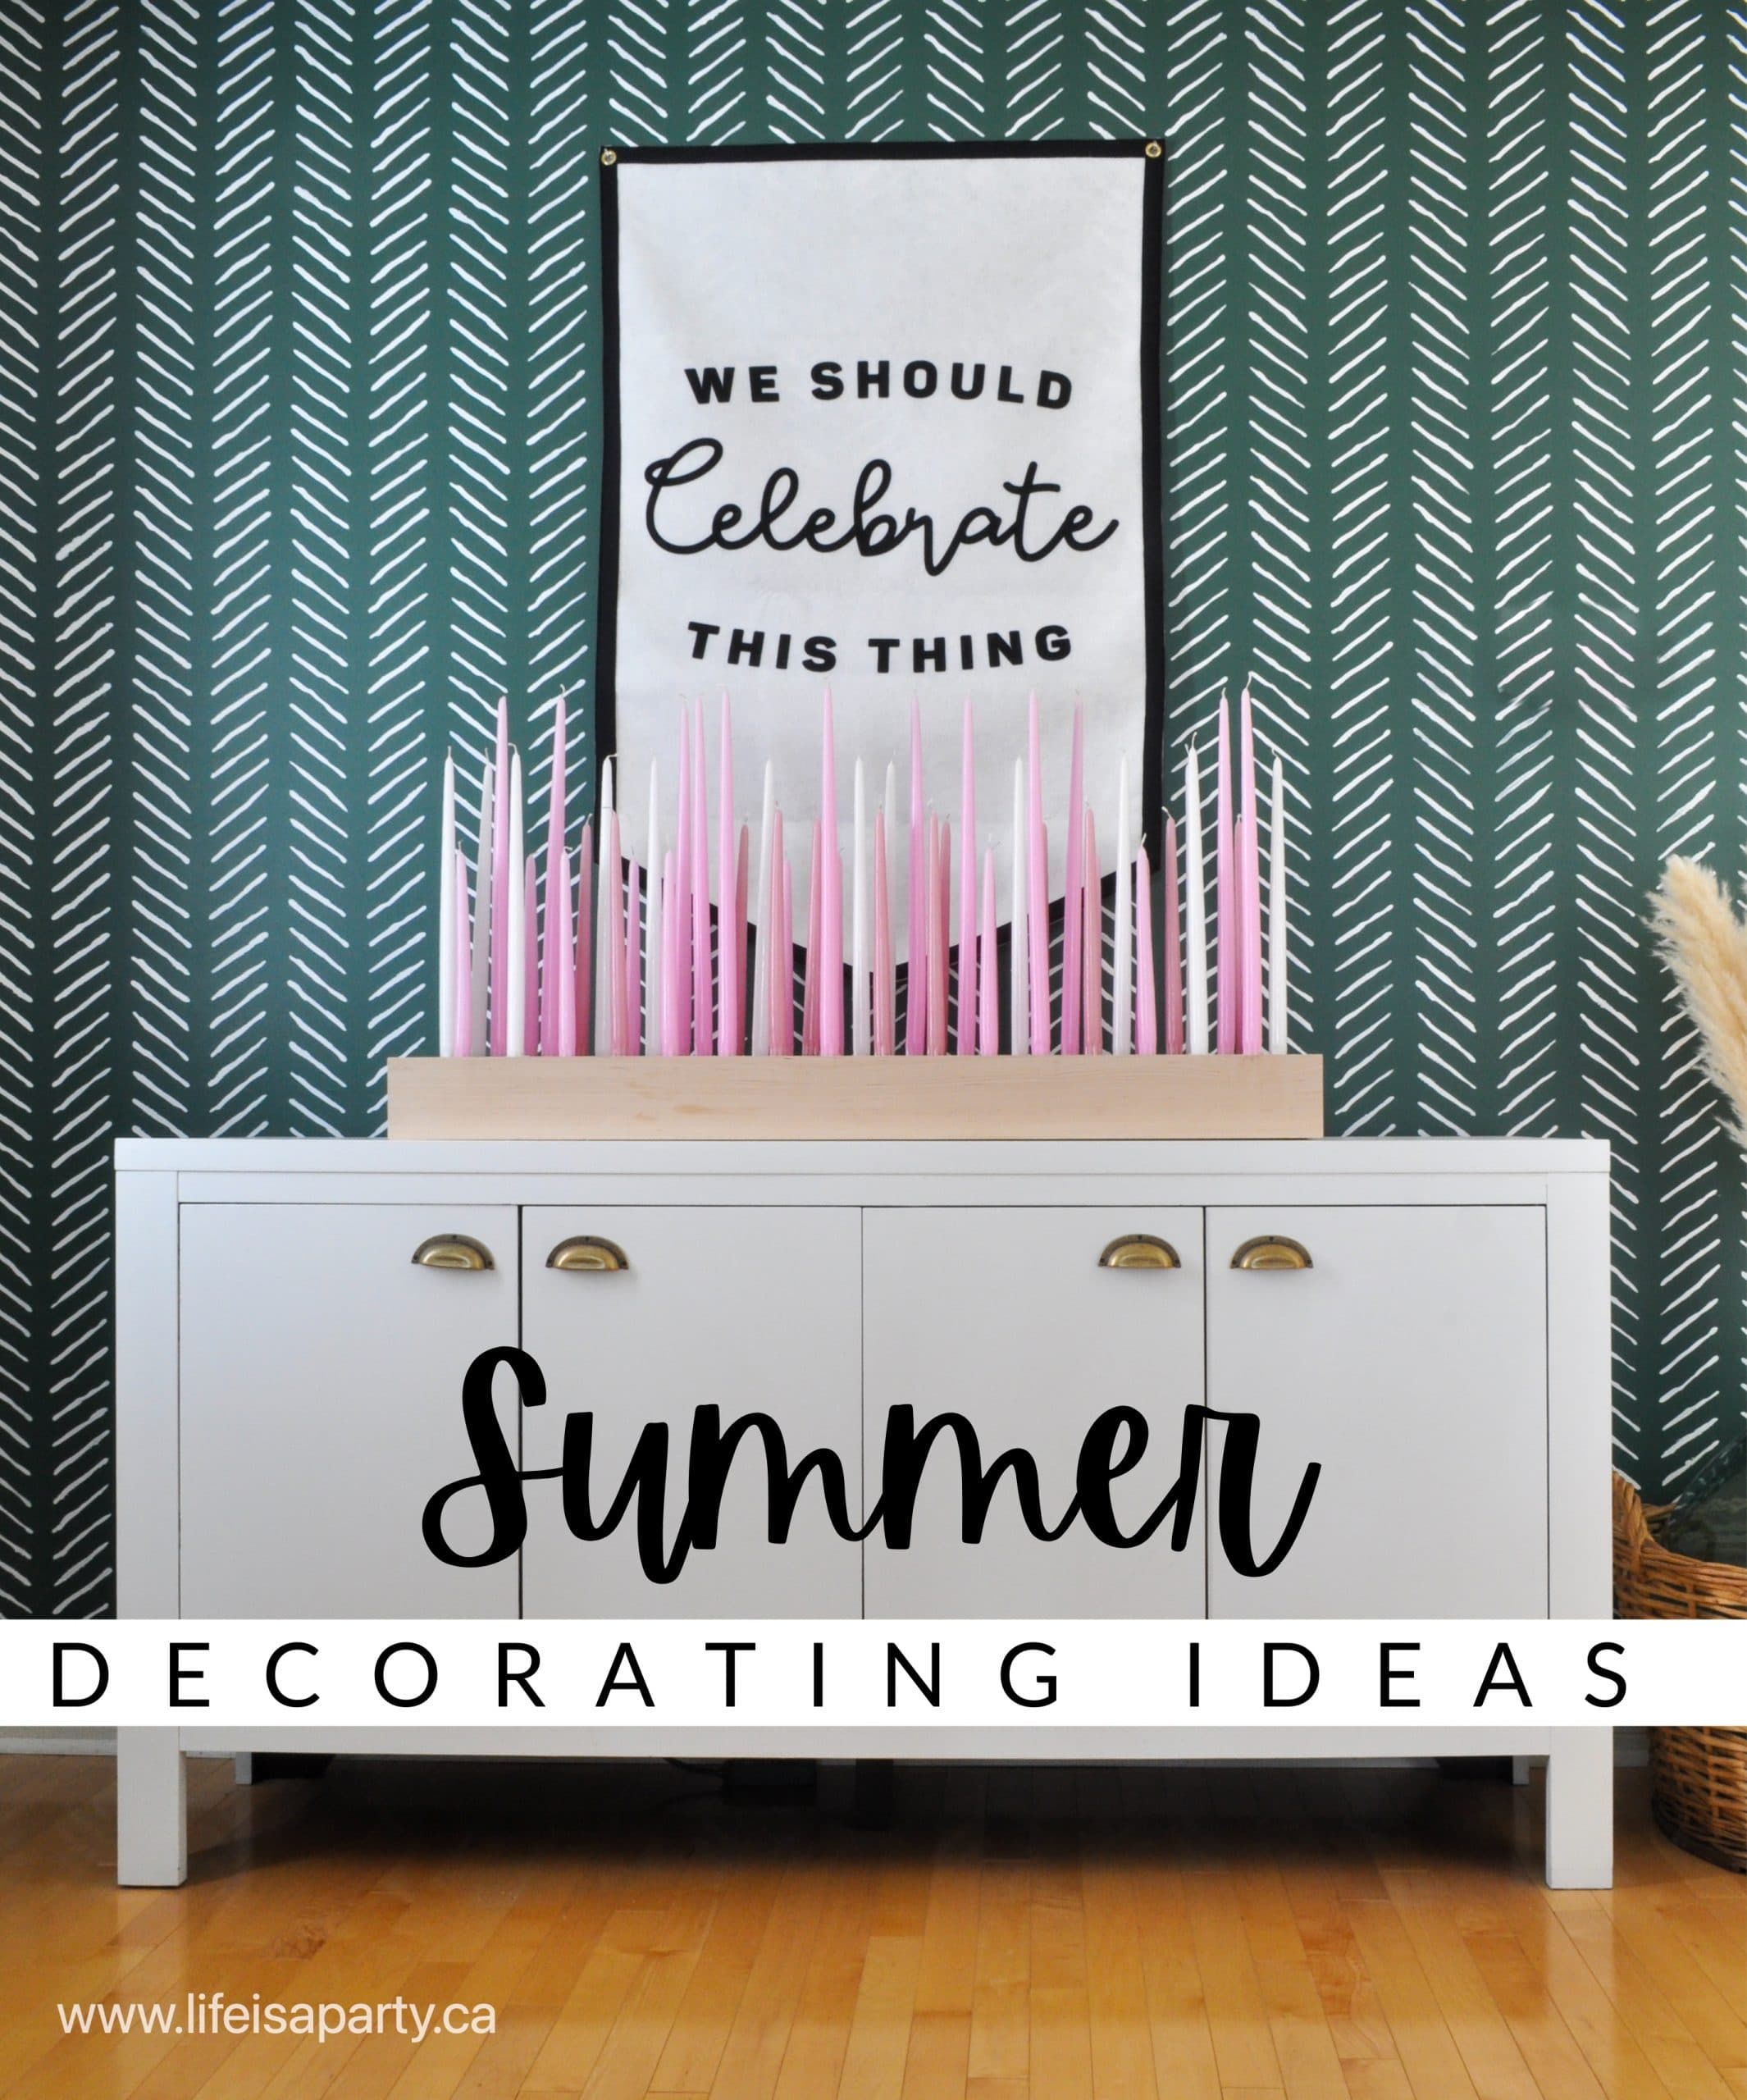 Summer Decorating Ideas Summer Home Tour: how to decorate for summer with lighter colours and fabrics, flowers and plants.